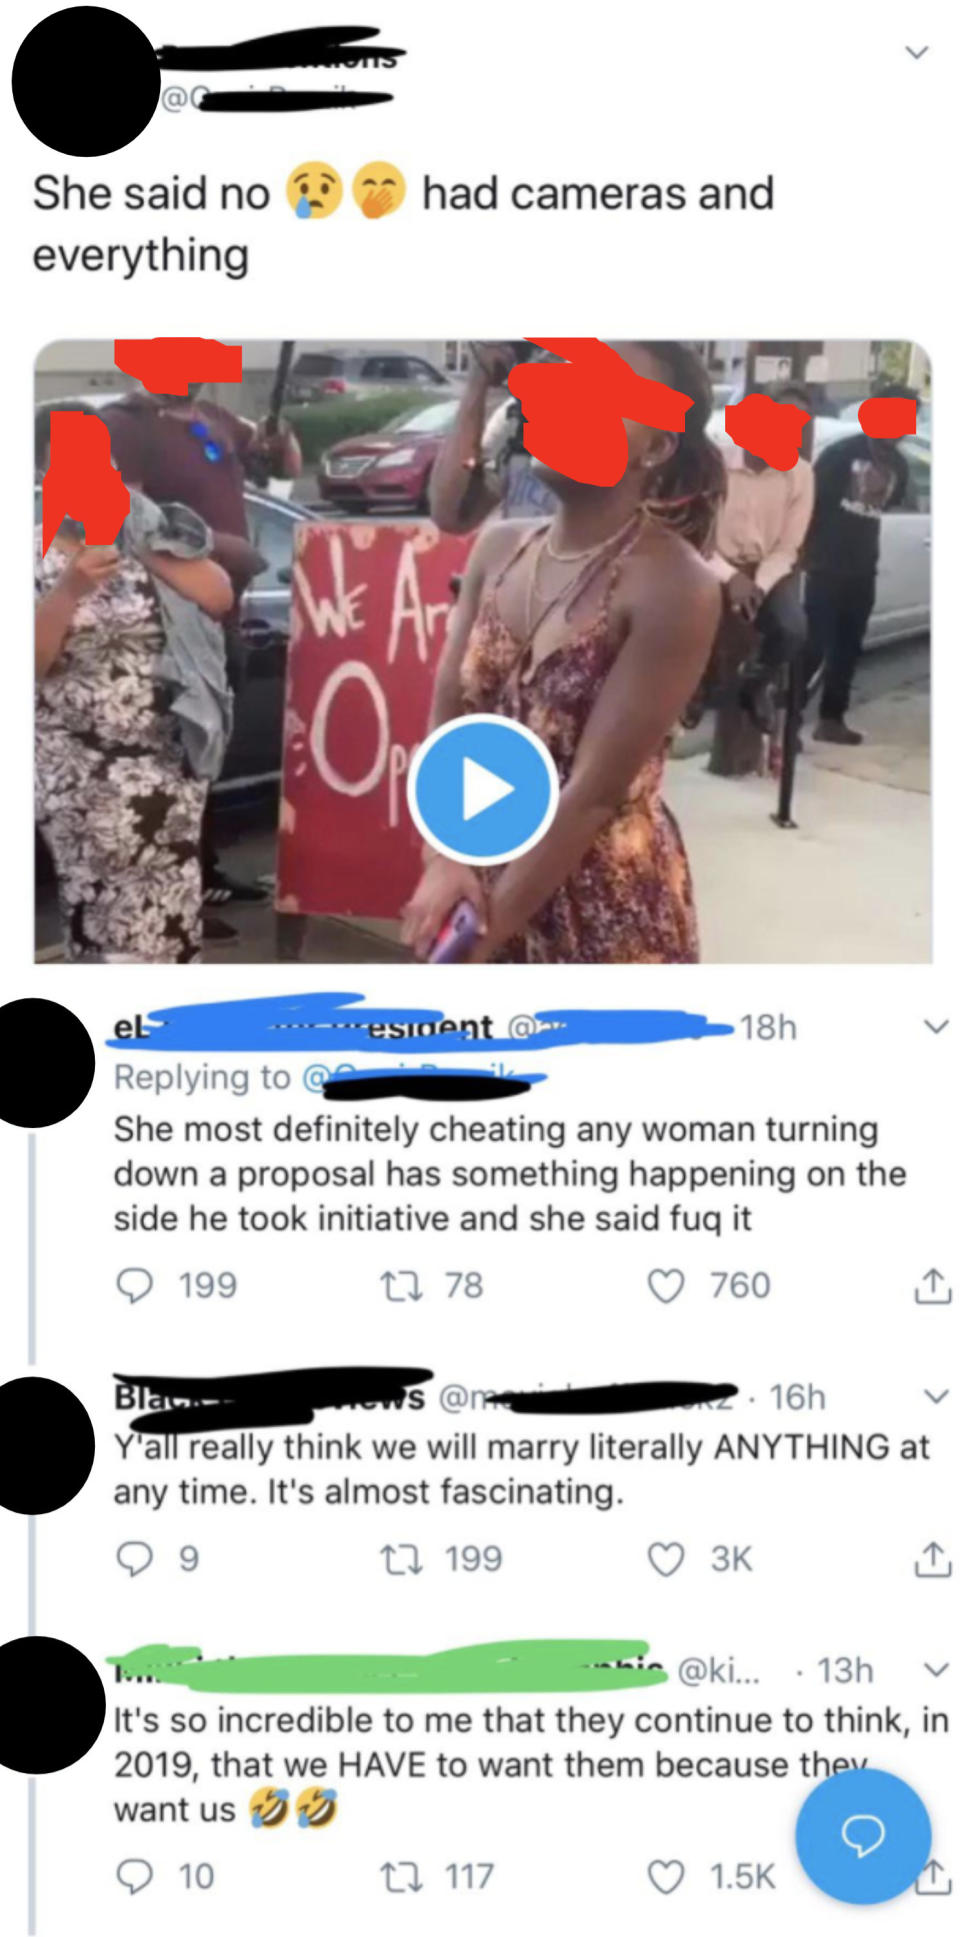 Man: "She most definitely cheating — any woman turning down a proposal has something happening on the side he took initiative and she said fuq it"